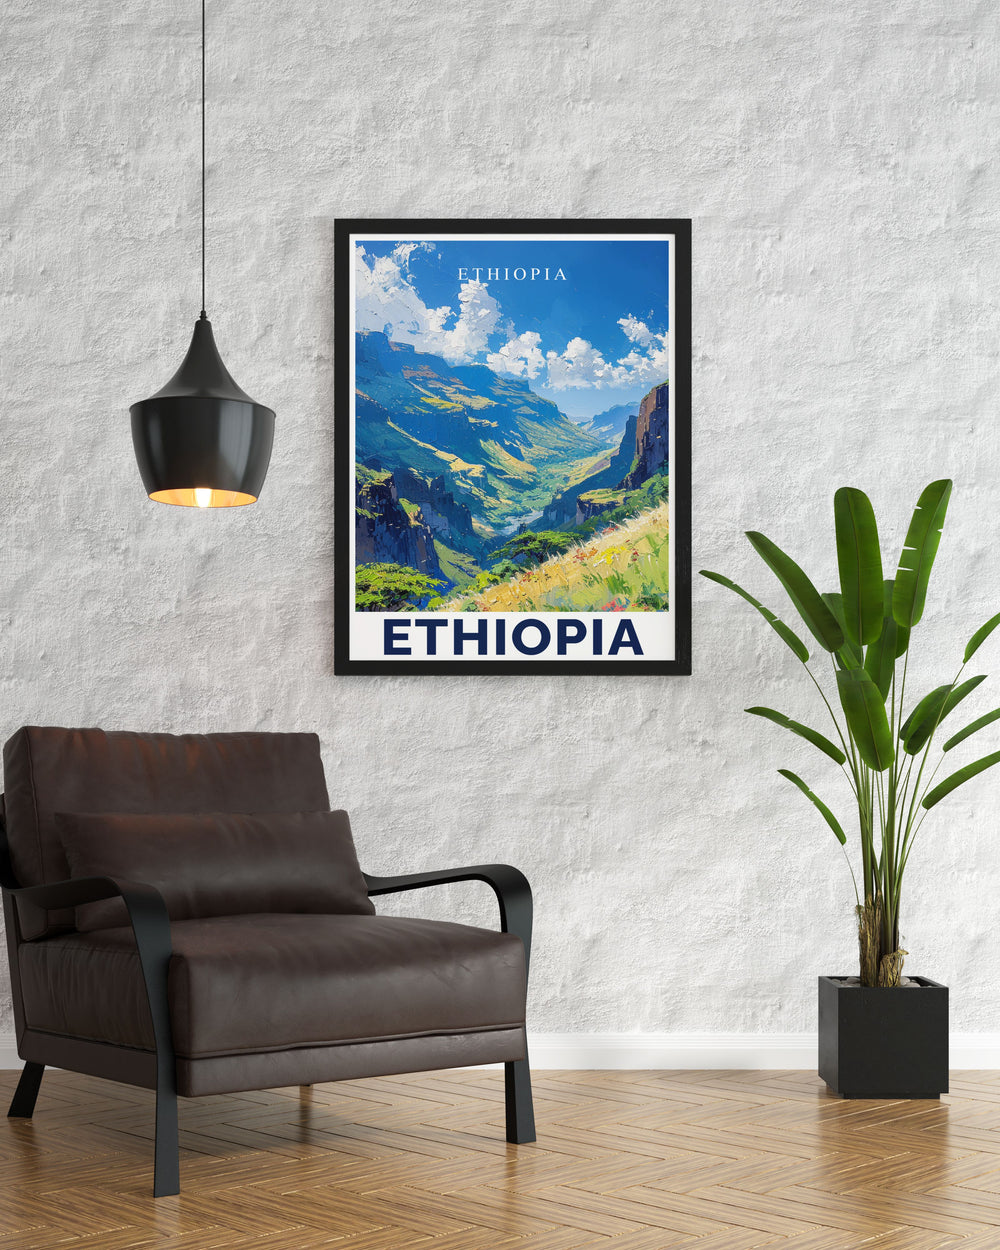 Beautiful Ethiopia Wall Art showcasing the Simien Mountains with vibrant colors and intricate details ideal for enhancing your living room office or bedroom with a piece of Ethiopias breathtaking landscape